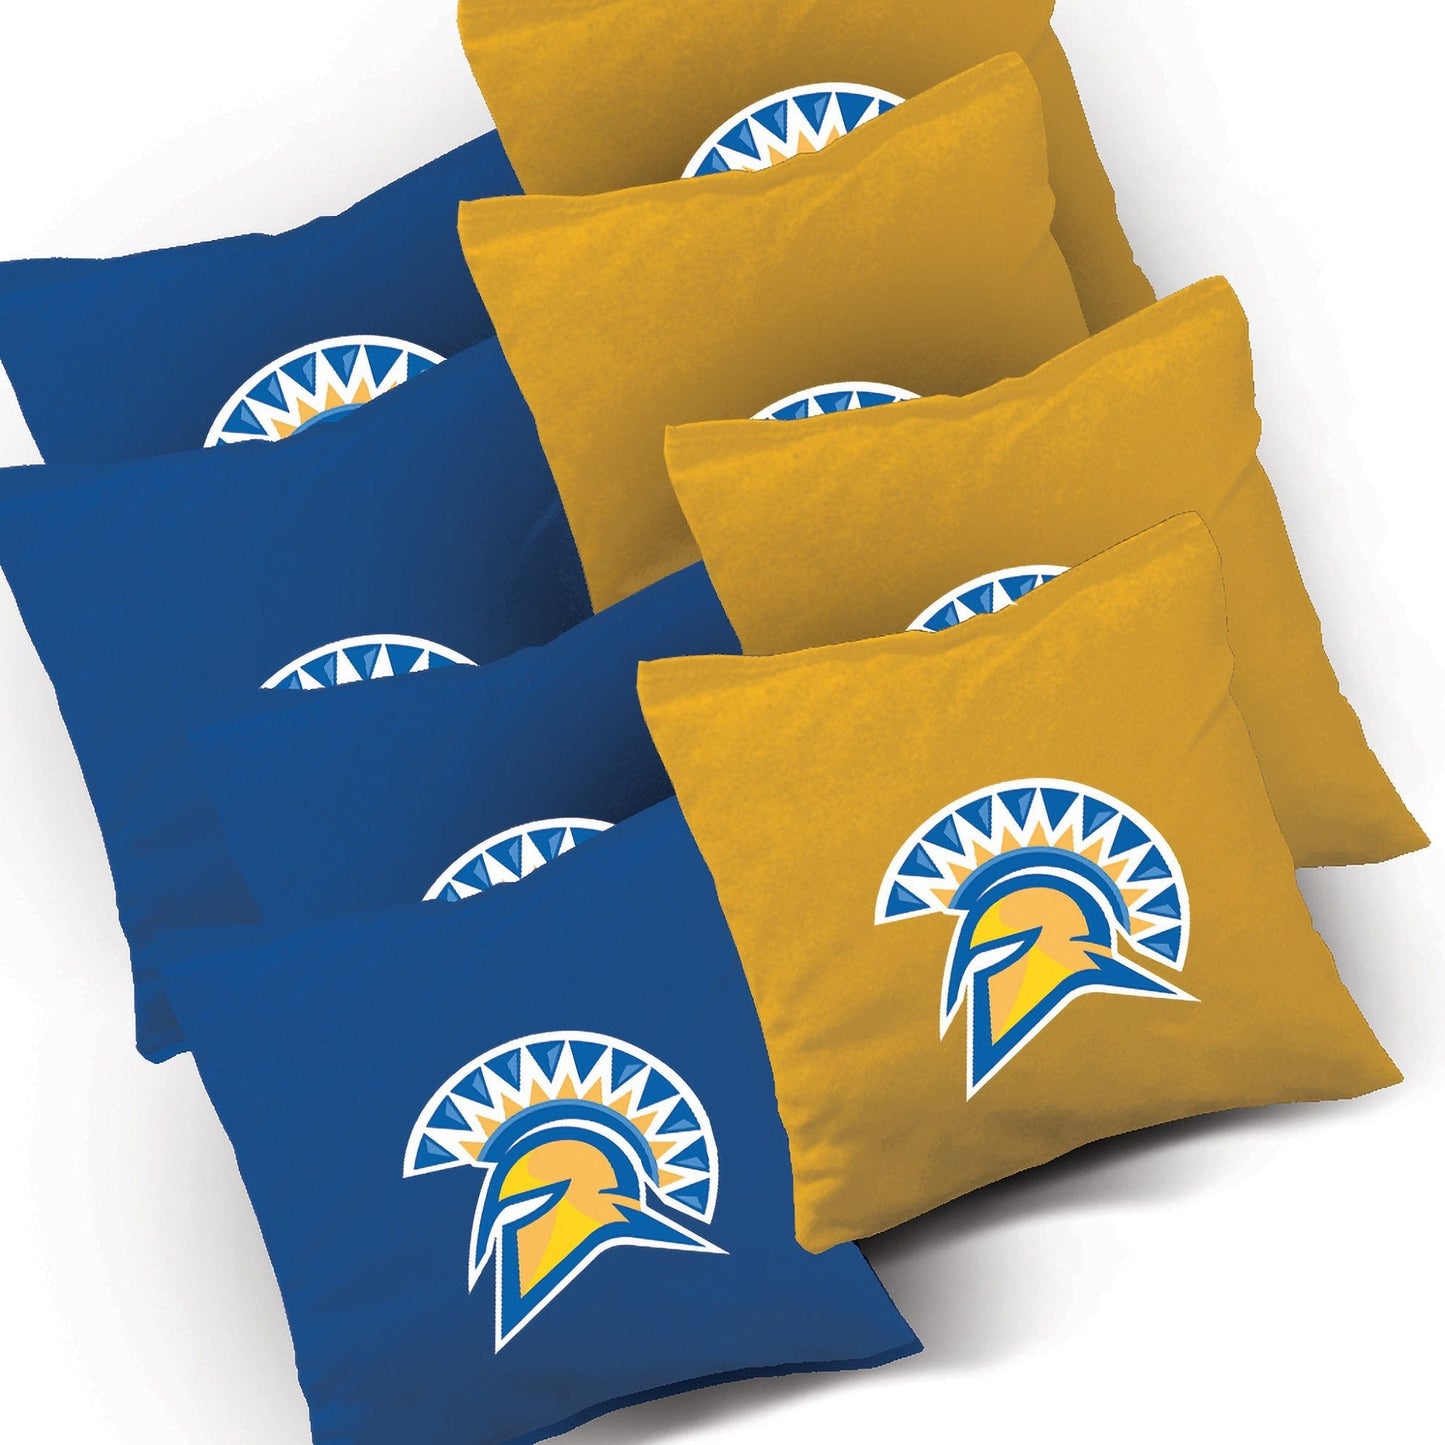 San Jose State Stained Pyramid team logo bags